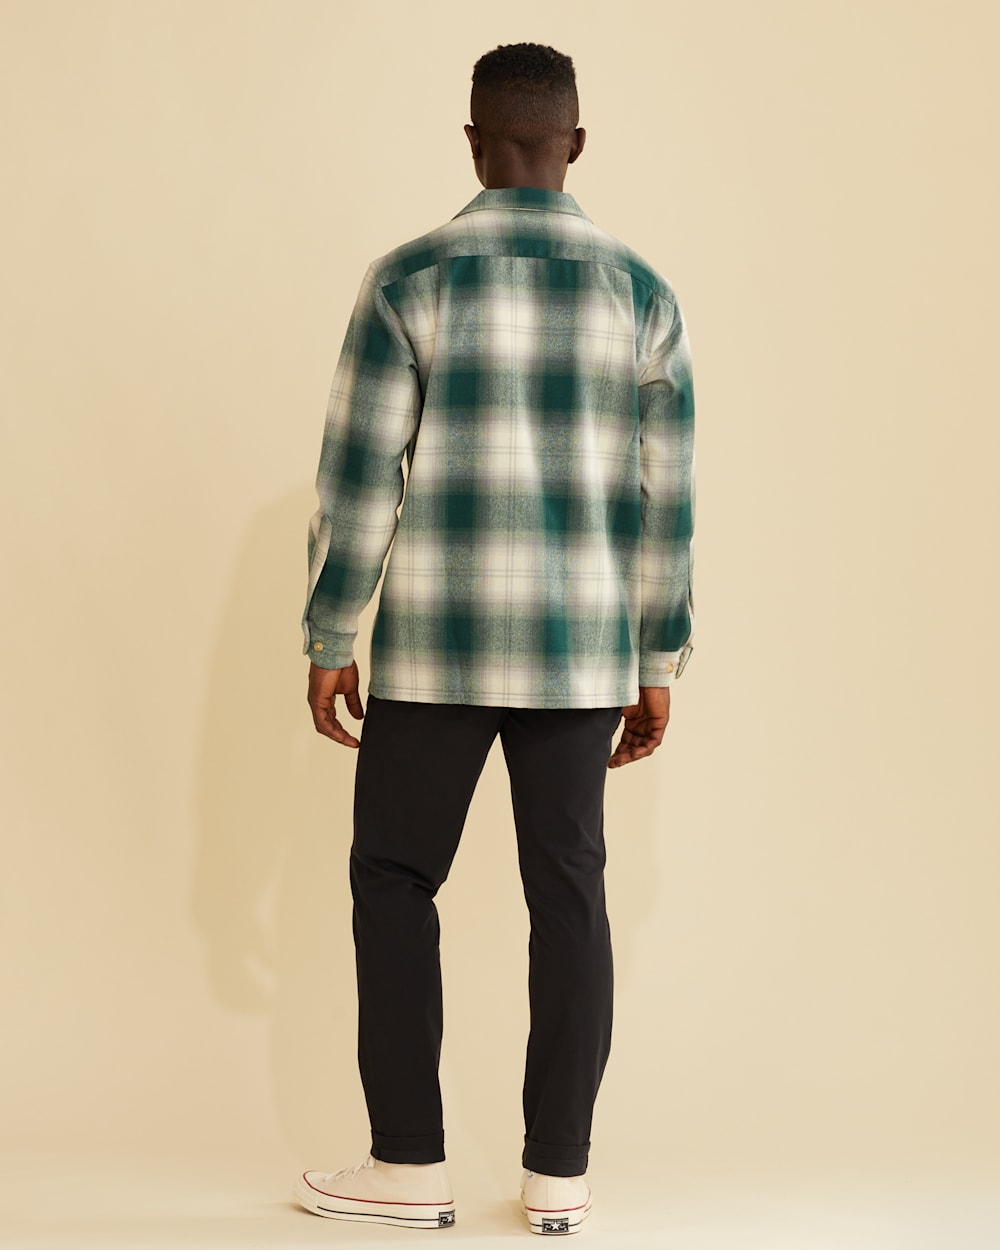 ALTERNATE VIEW OF MEN'S PLAID BOARD SHIRT IN GREEN/WHITE OMBRE image number 5